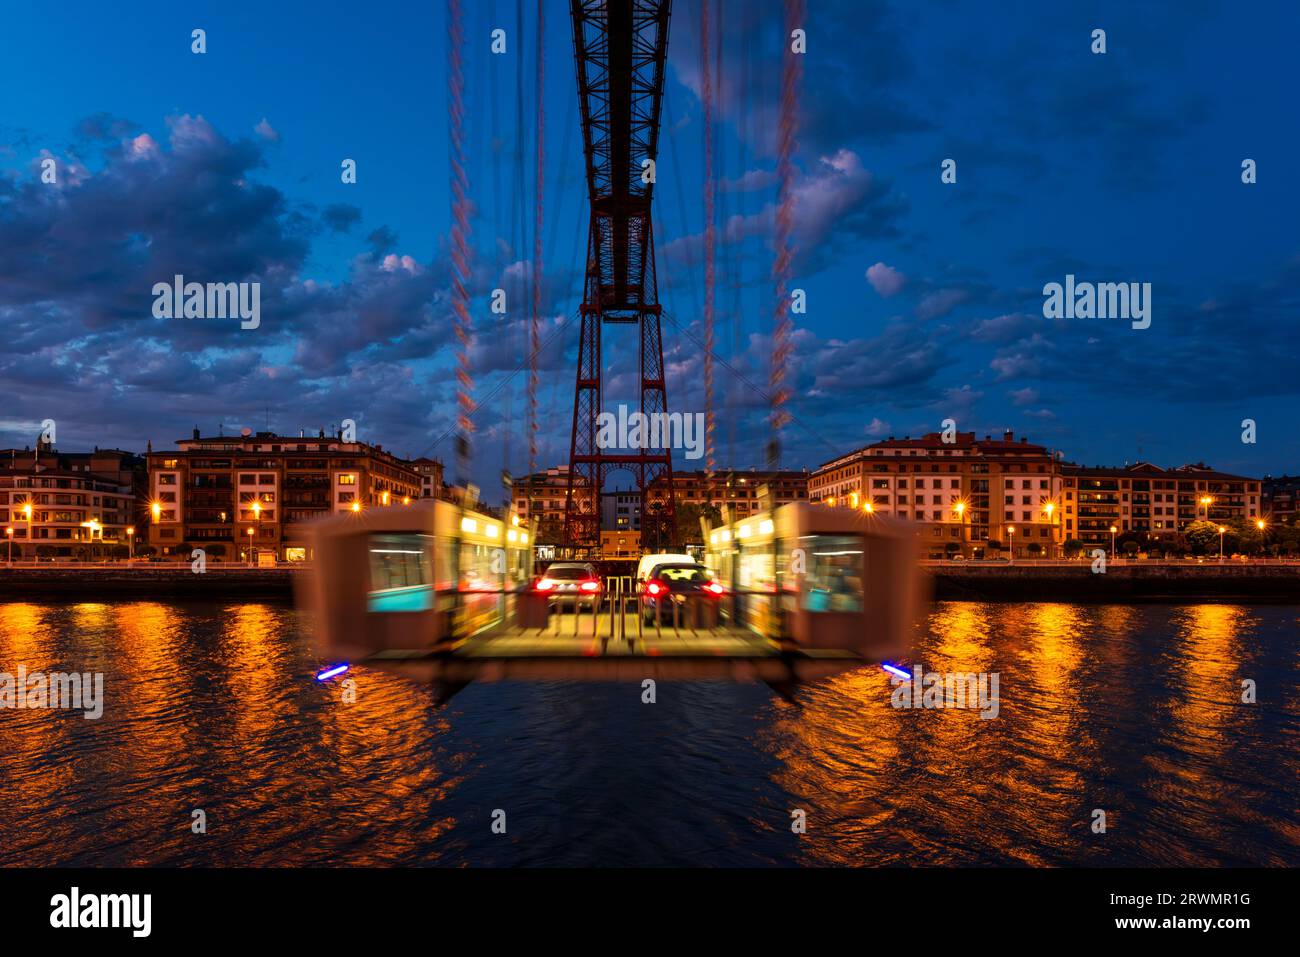 Frontal view of the Vizcaya Bridge in Portugalete, Spain at dusk. The Vizcaya Bridge is a transporter bridge and opened in 1893. Stock Photo